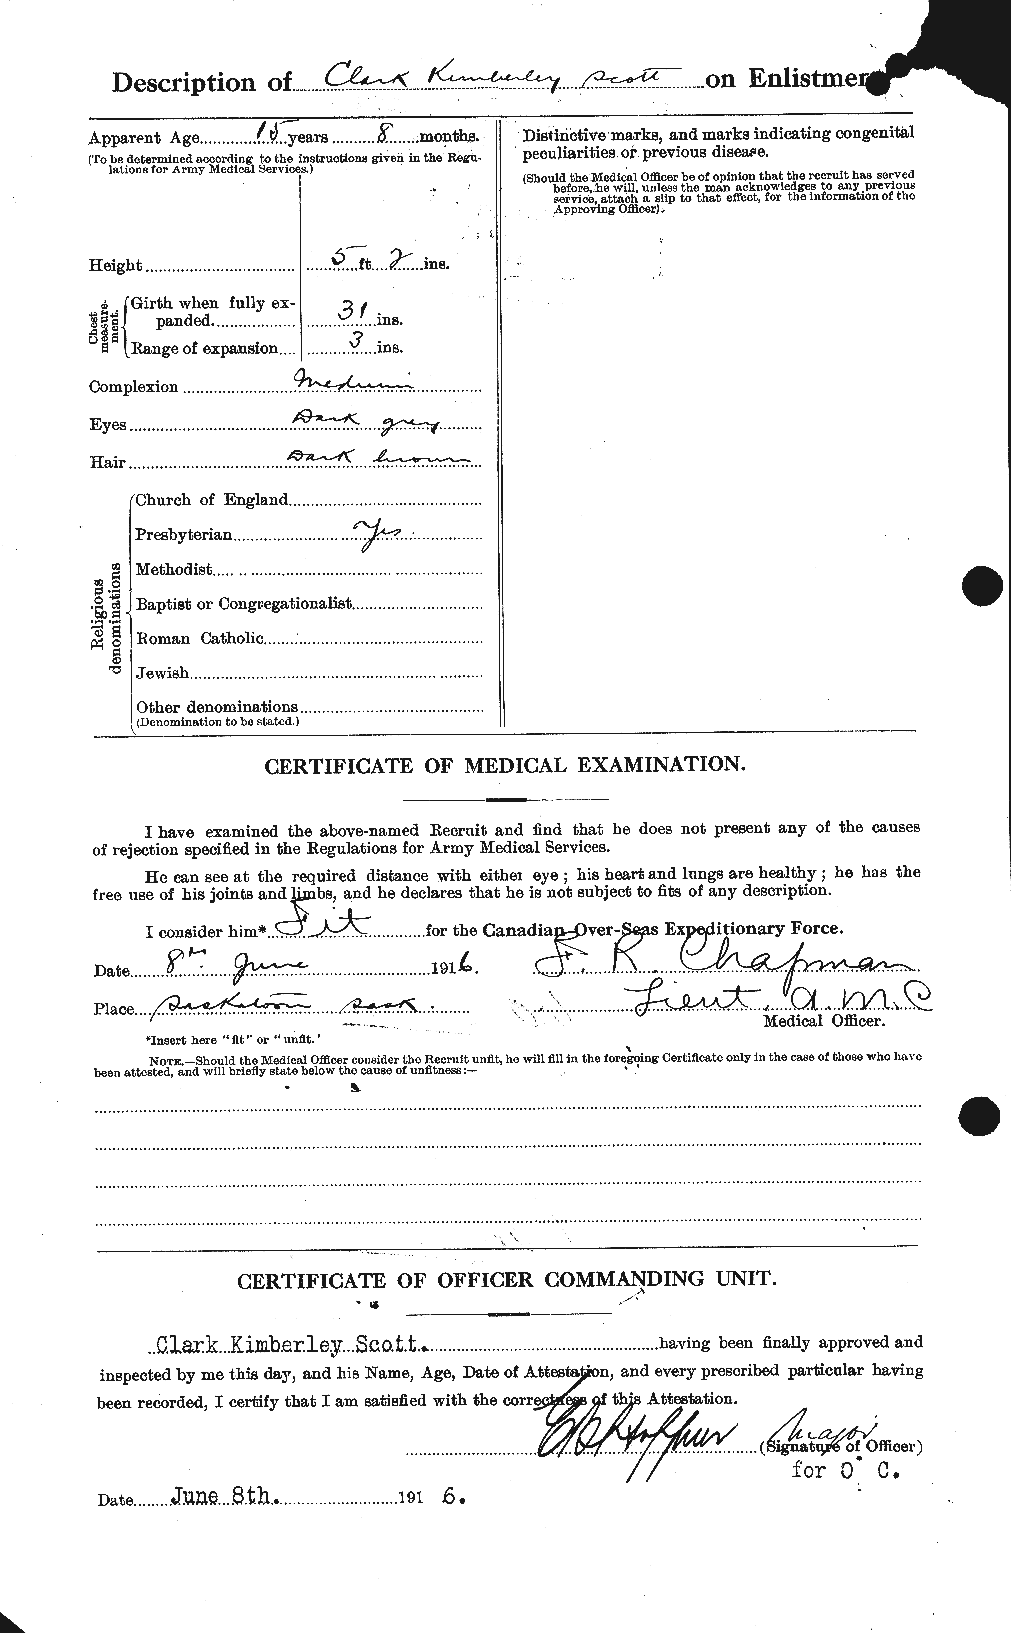 Personnel Records of the First World War - CEF 085637b